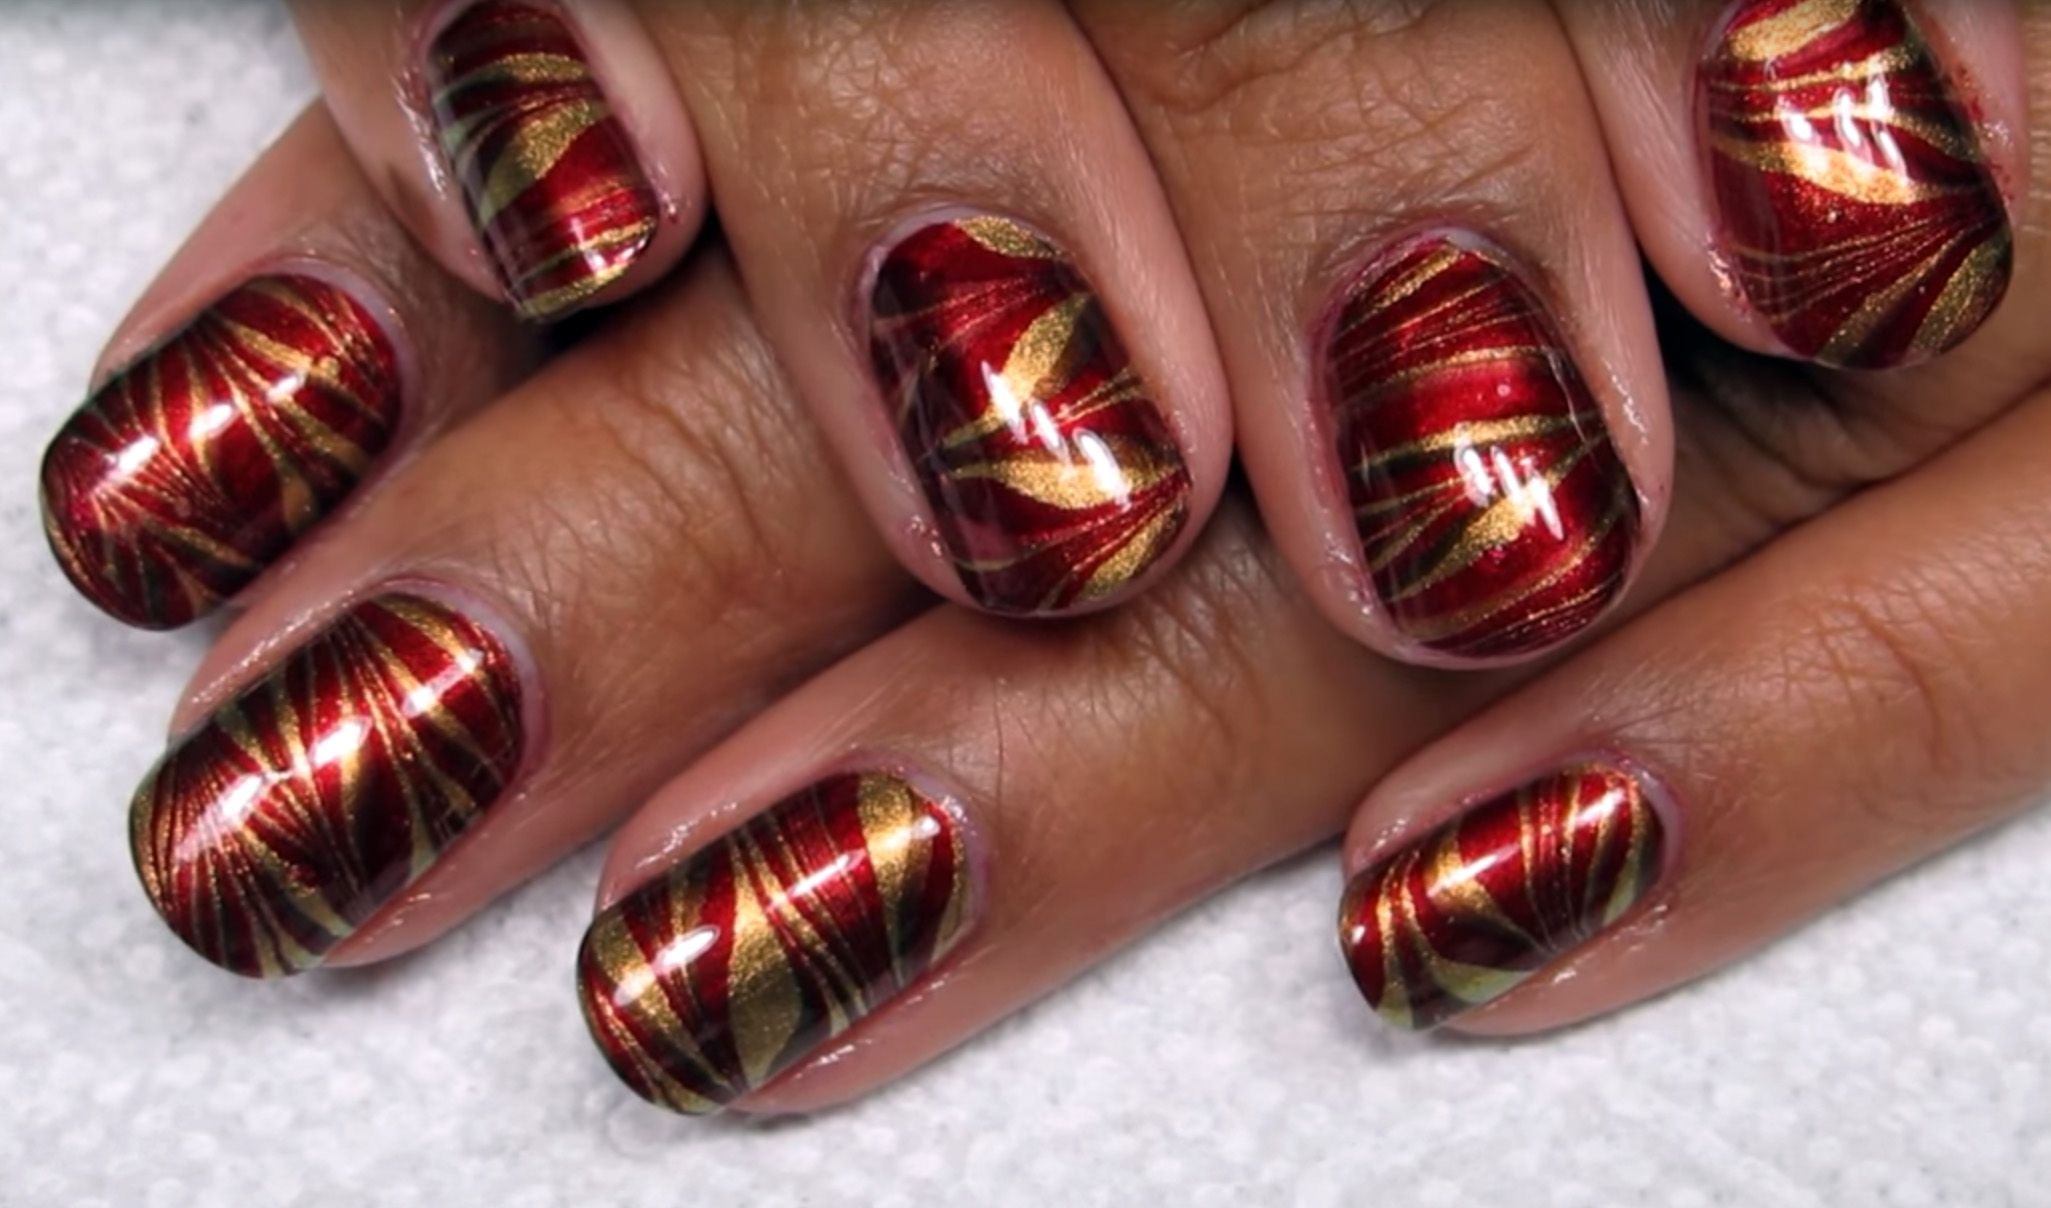 Thanksgiving Dipping Powder Nails: 10 Festive Designs to Try - wide 5